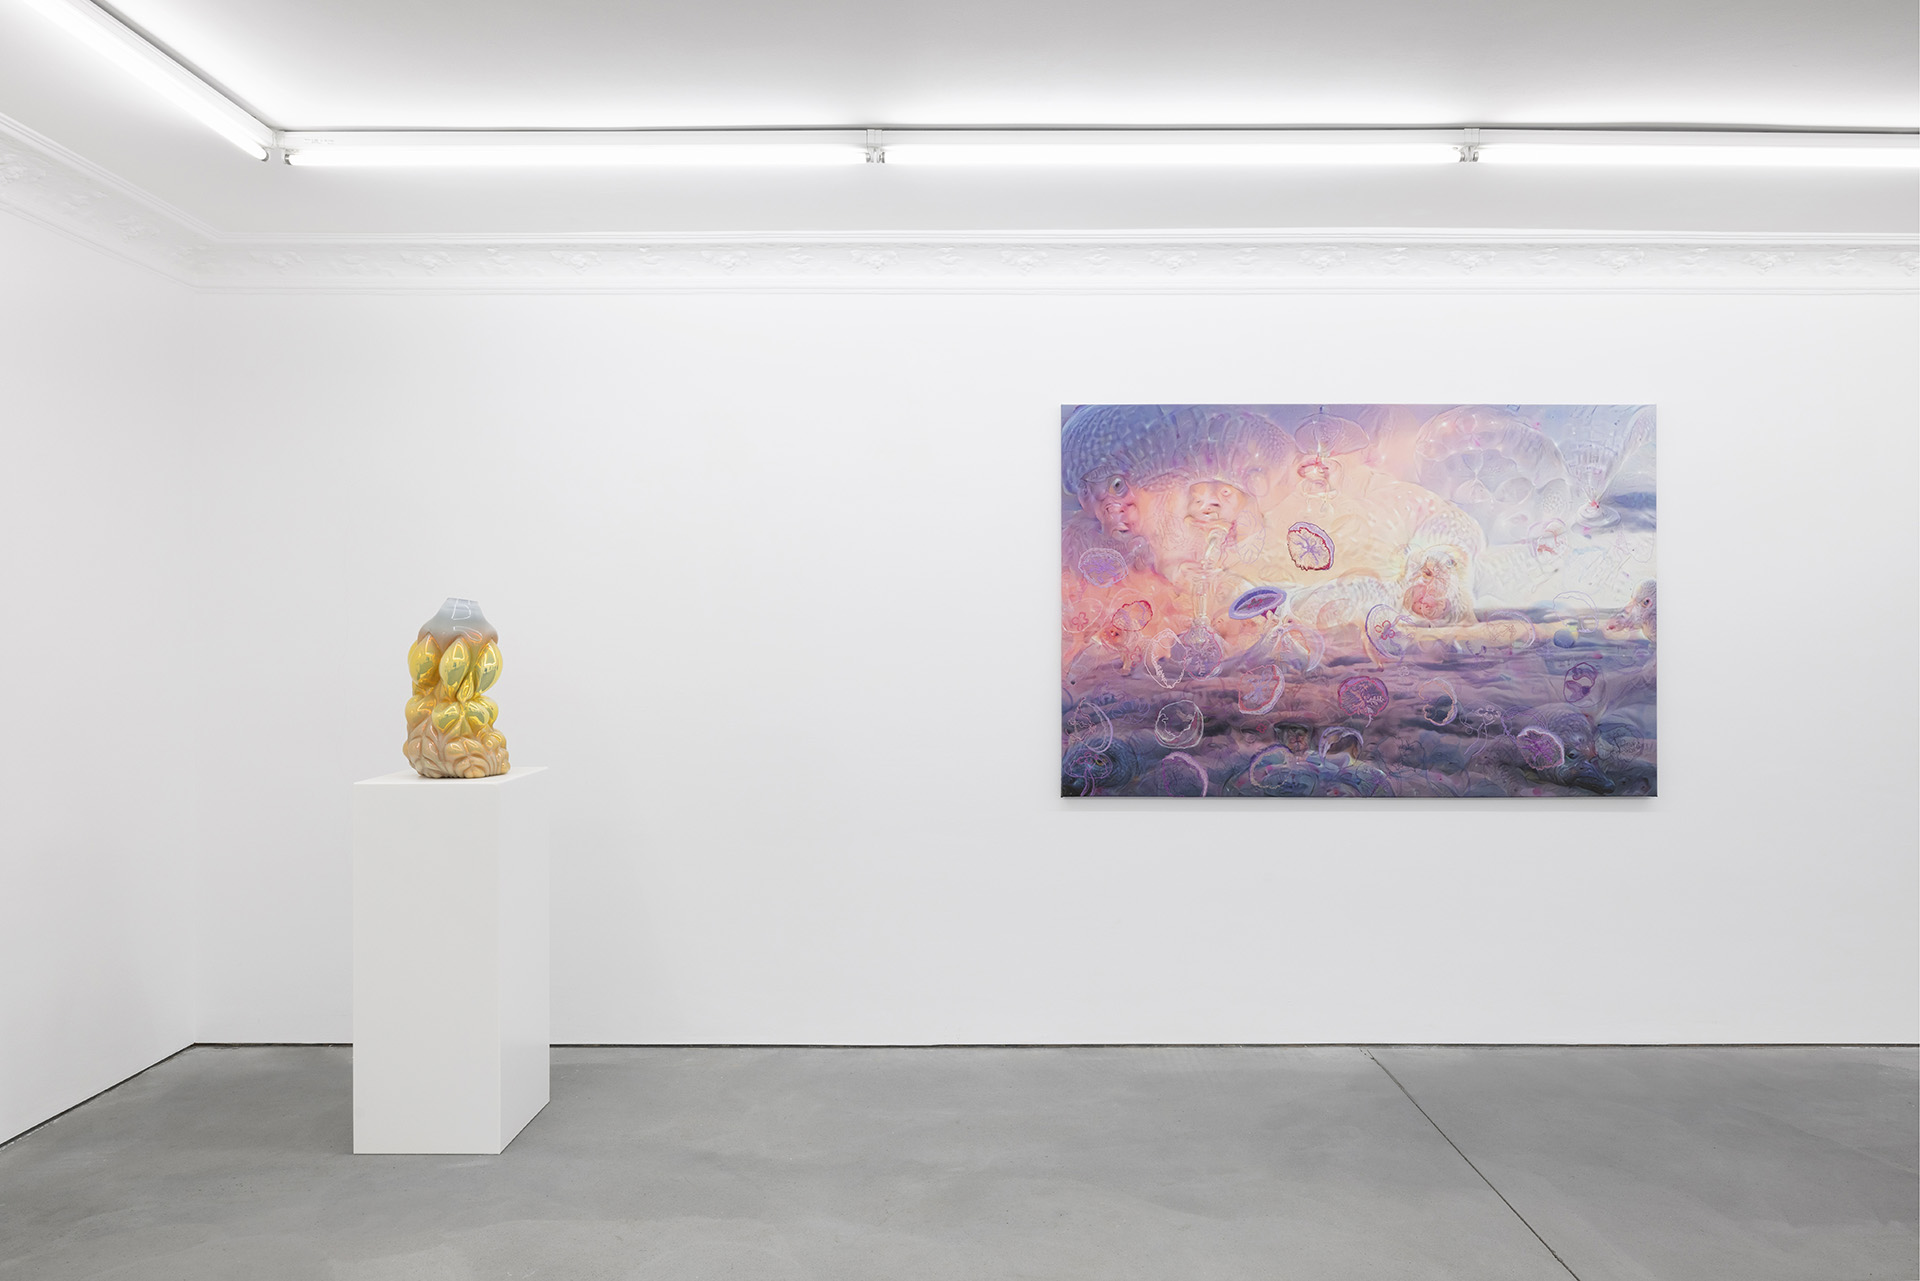 Purity is impossible in a porous world, installation view at Future Gallery